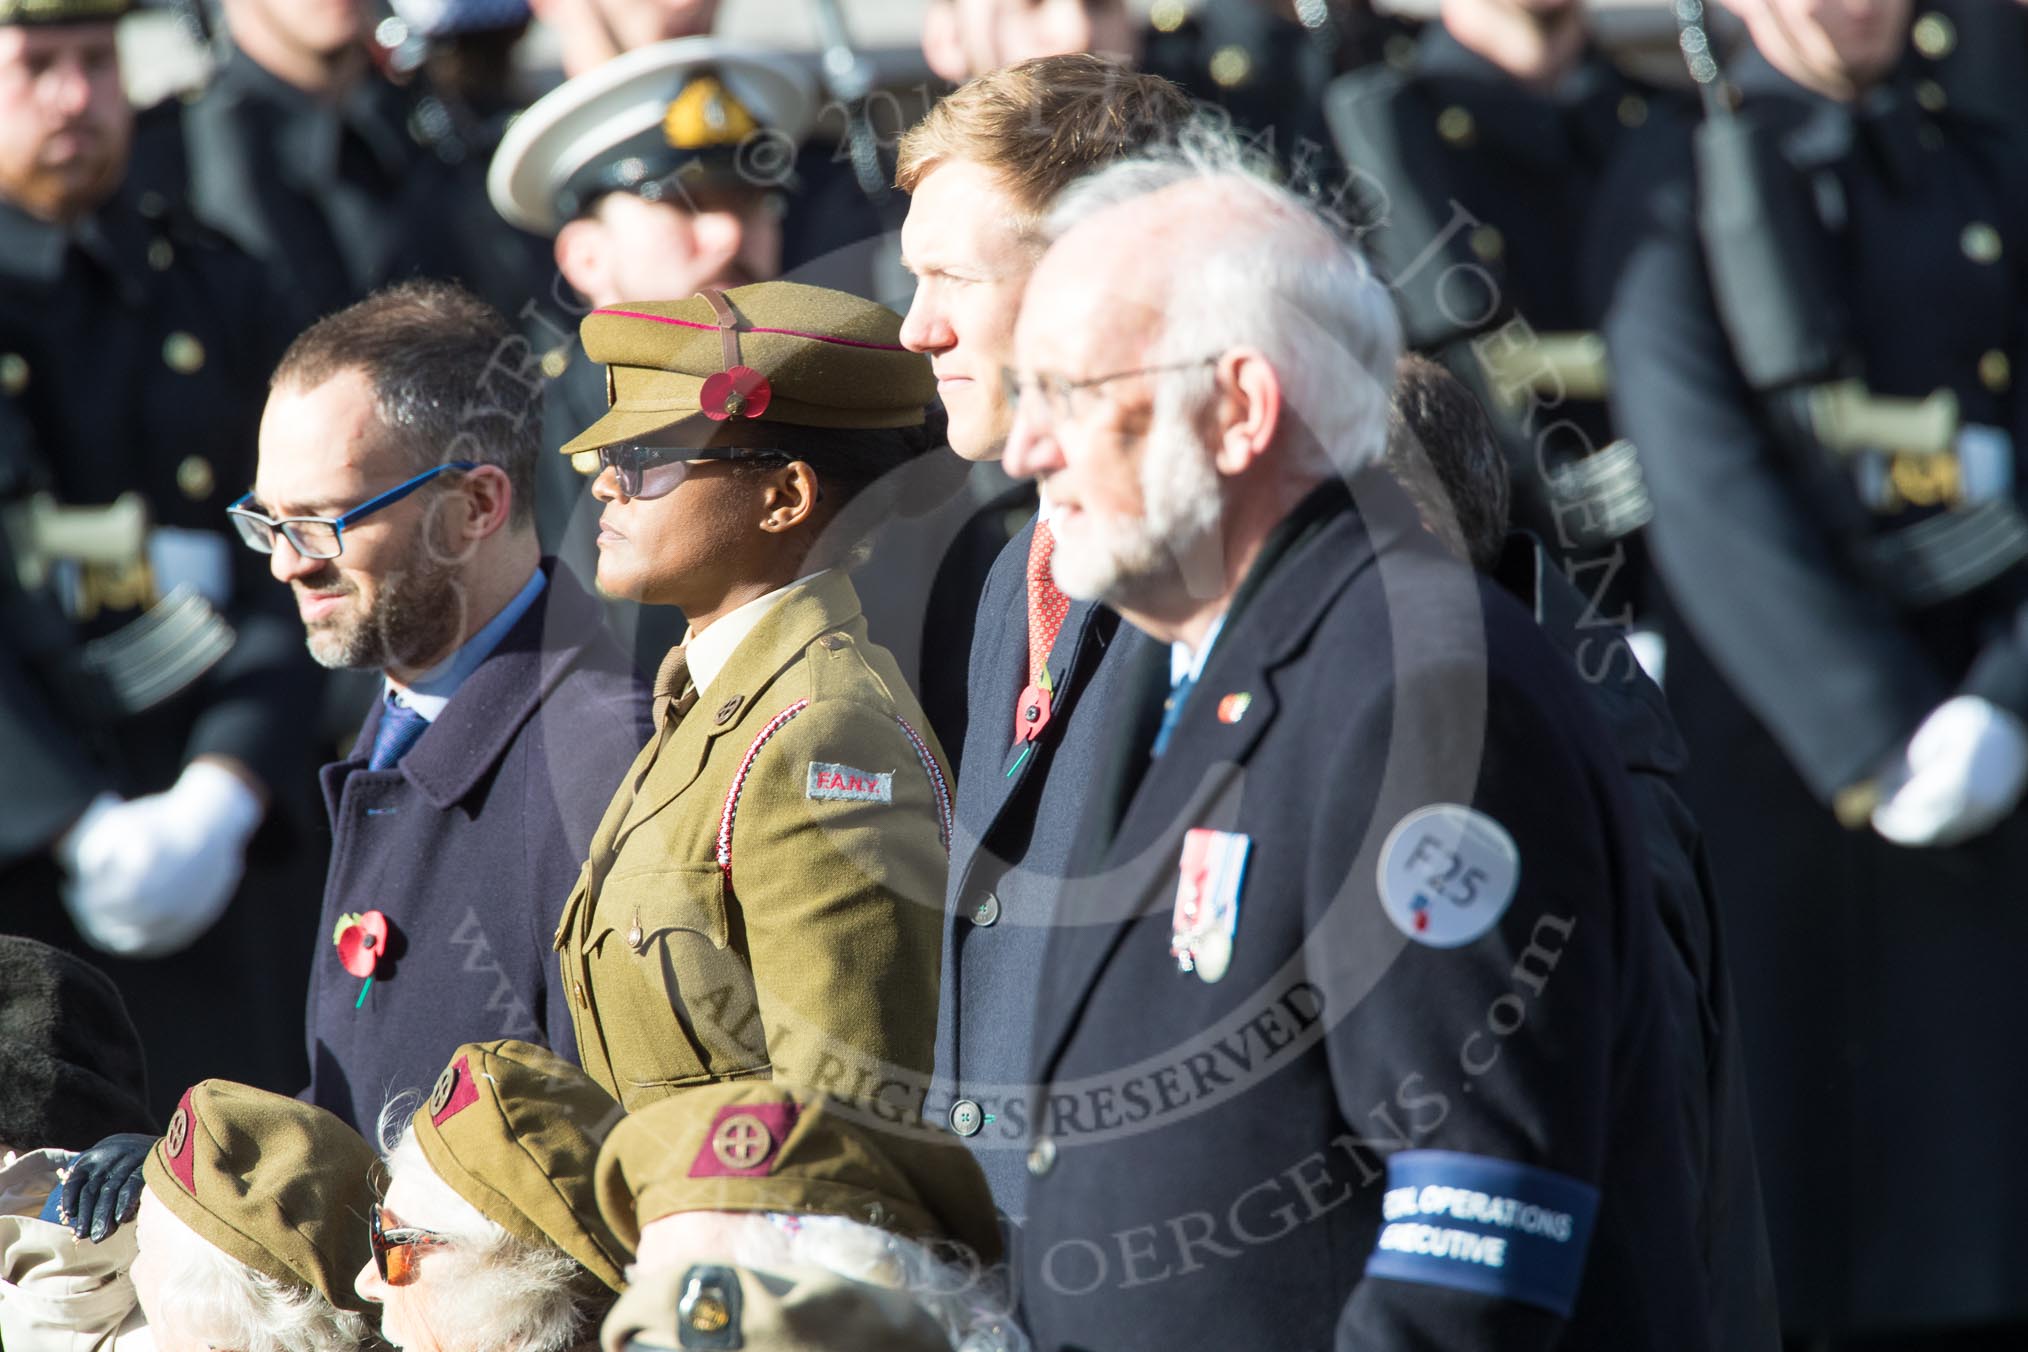 The Special Forces Club (Group F25, 13 members) during the Royal British Legion March Past on Remembrance Sunday at the Cenotaph, Whitehall, Westminster, London, 11 November 2018, 11:54.